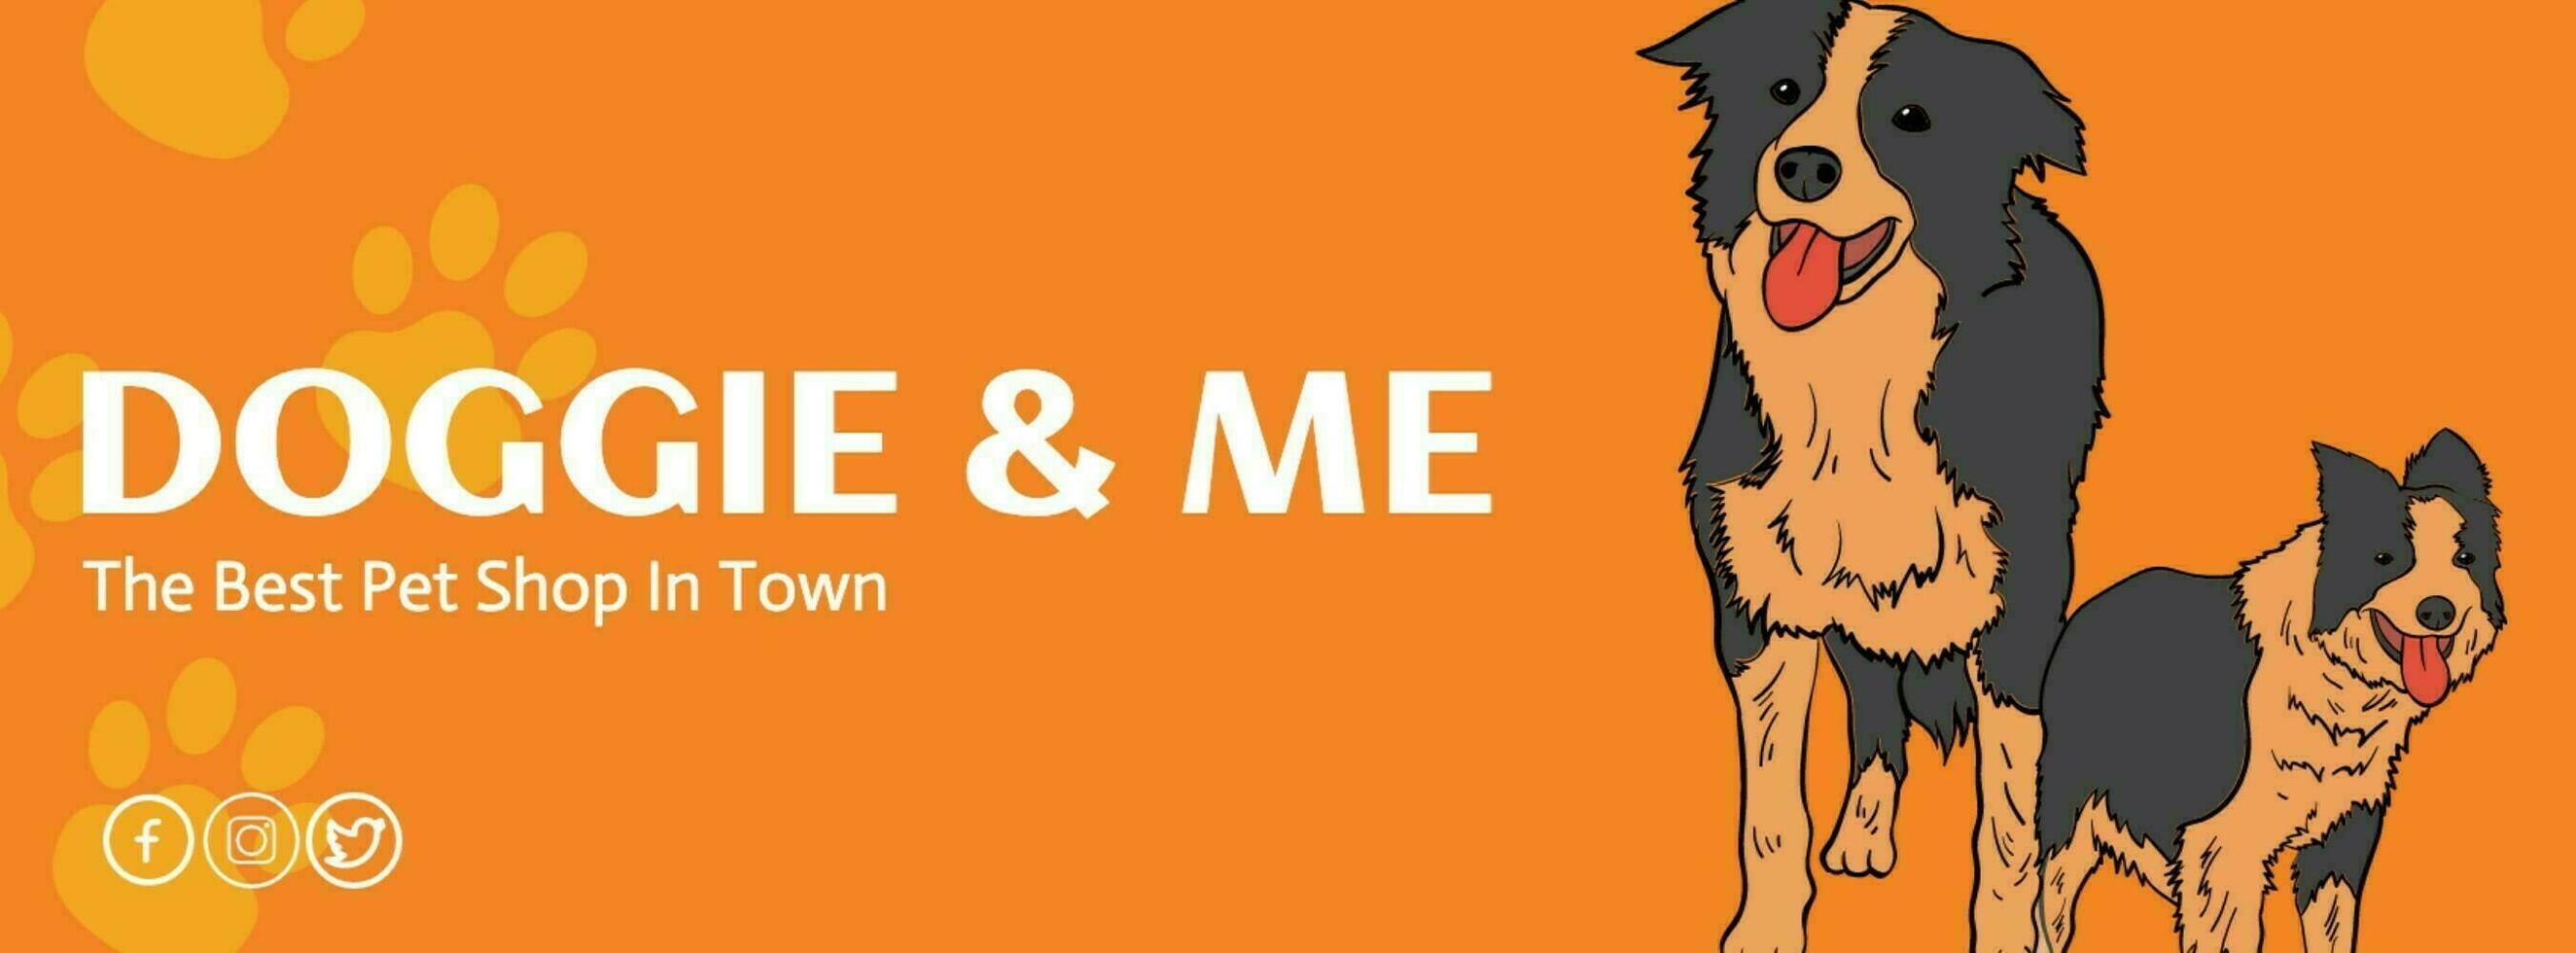 Doggie and Me Pet Shop template